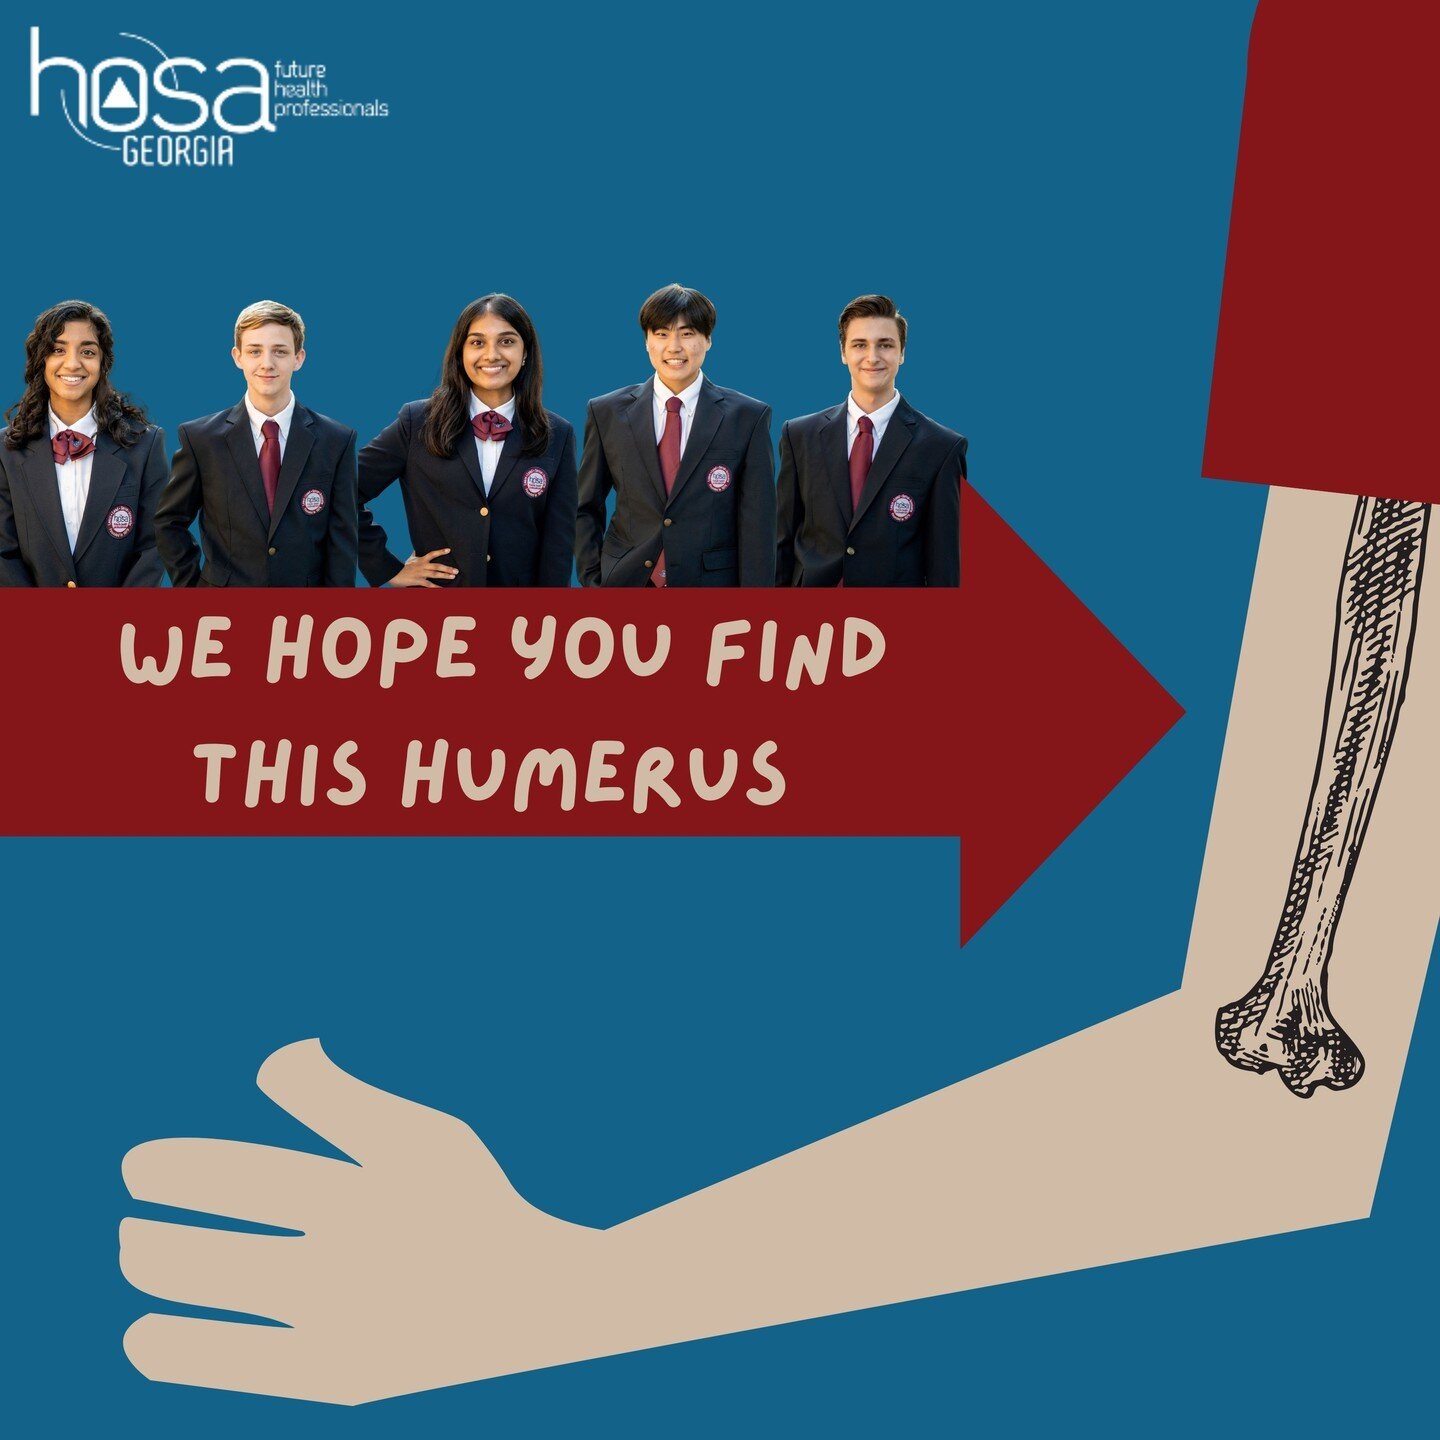 REVAMPED PODCAST ALERT! In case you didn't know this already, Georgia HOSA has its very own podcast (available on all streaming services)! You can find us by searching for &quot;We Hope You Find This Humerus&quot;- stay tuned for a special first epis